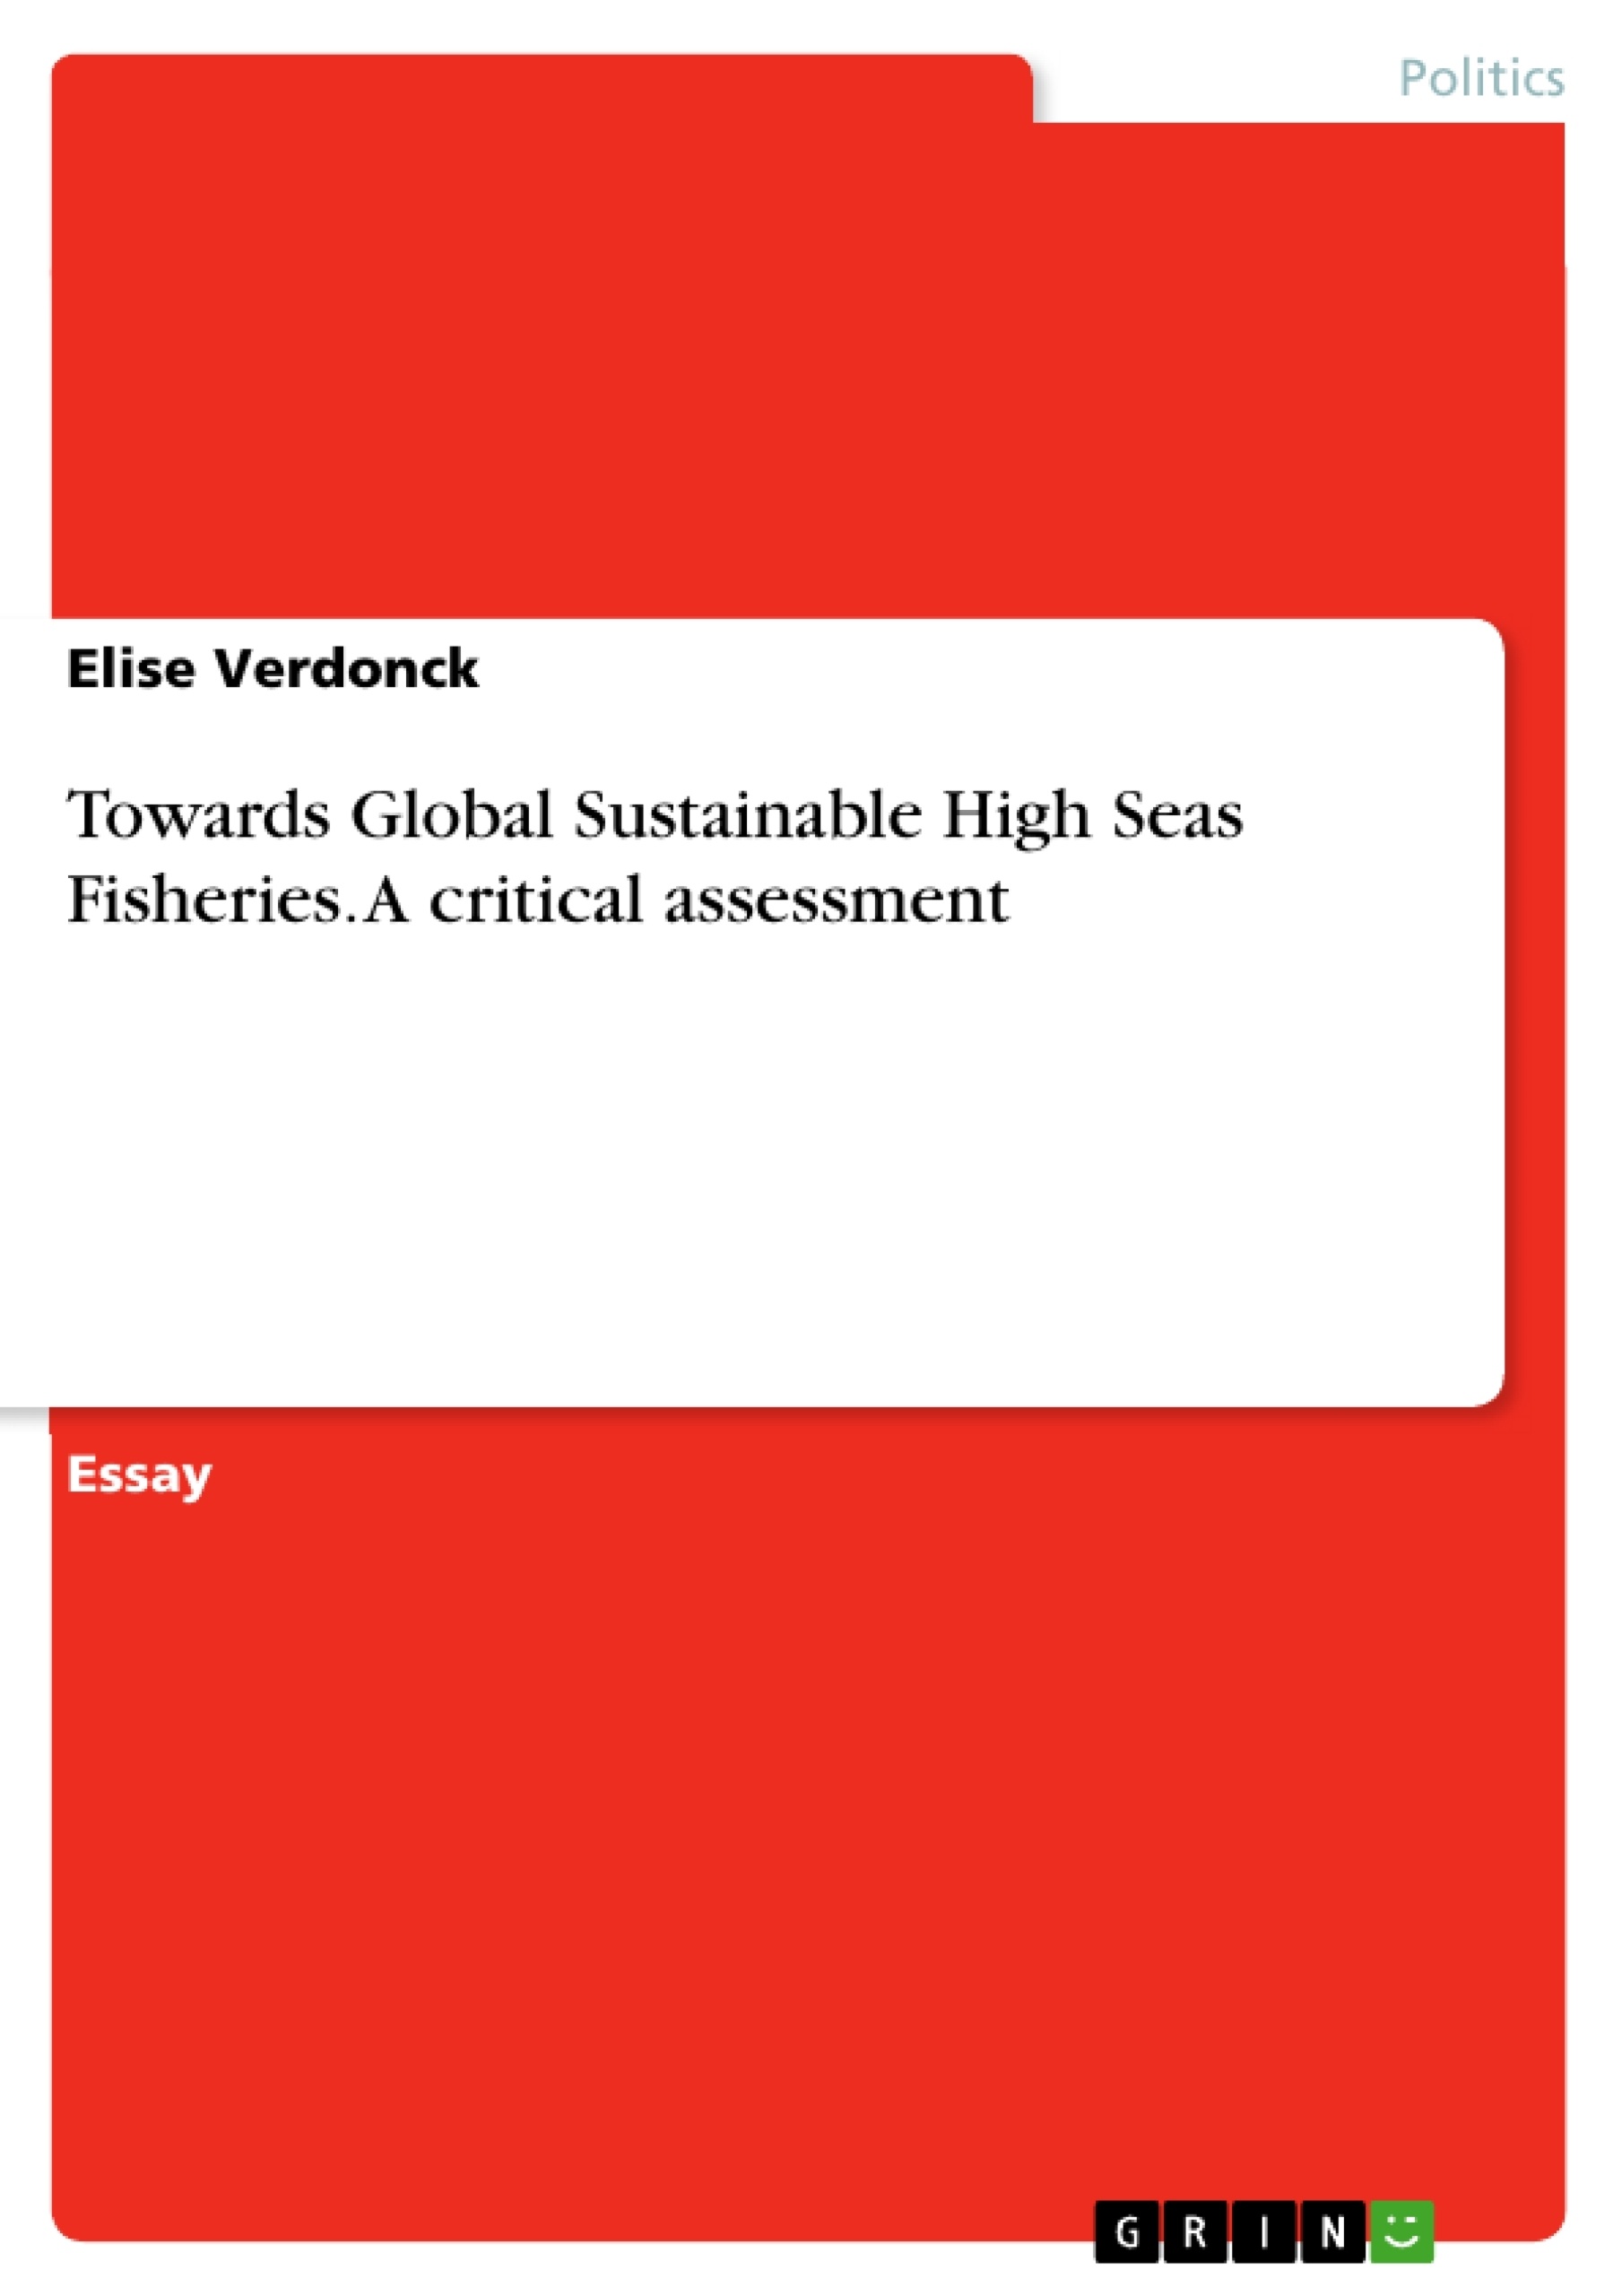 Titre: Towards Global Sustainable High Seas Fisheries. A critical assessment